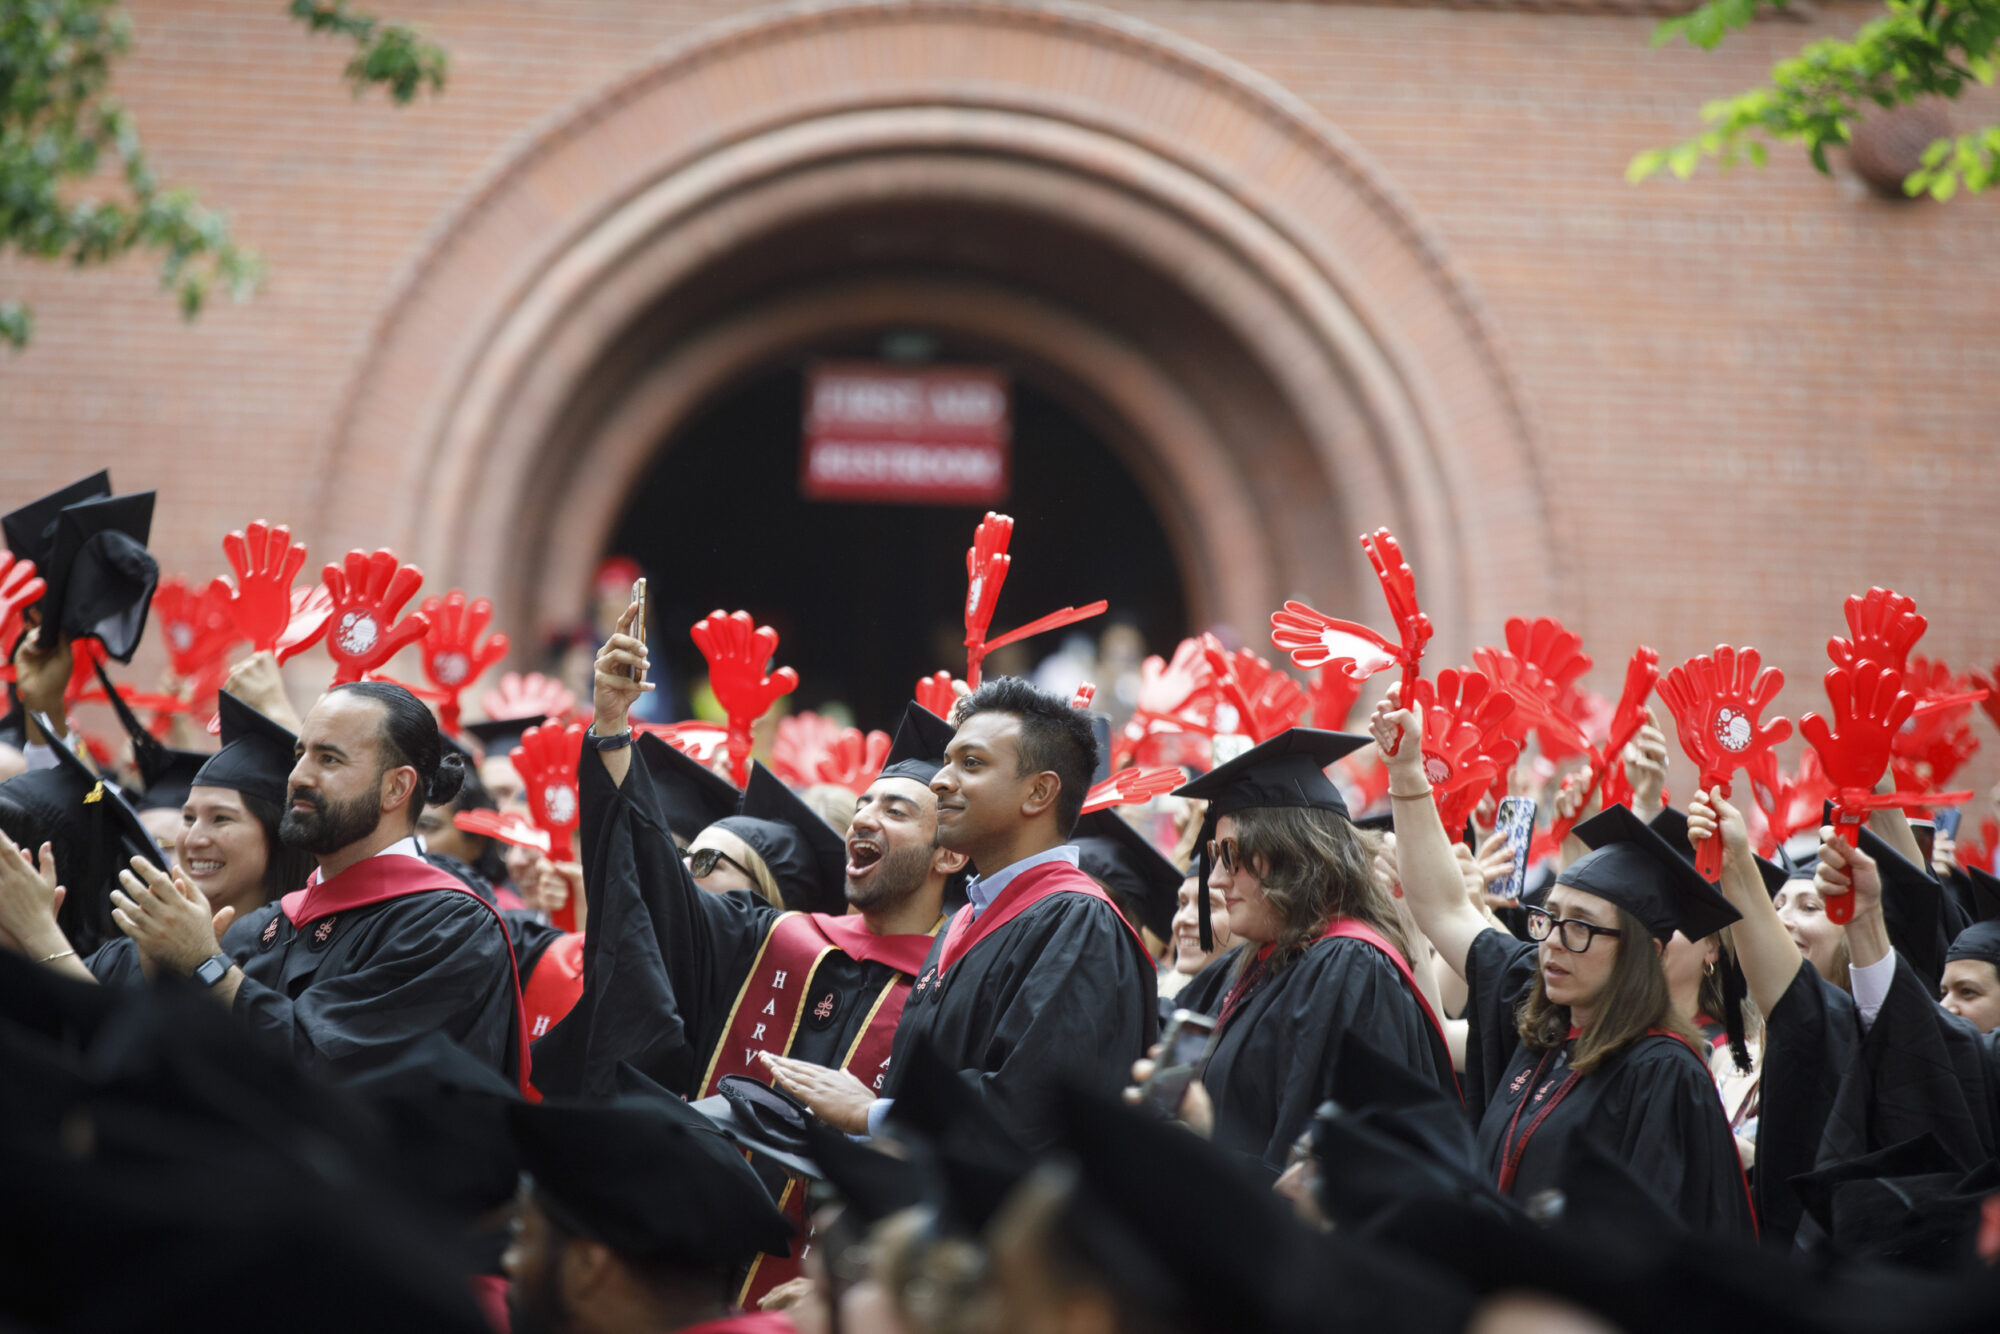 Students wearing graduation regalie celebrate with crimson clappers at Commencement.